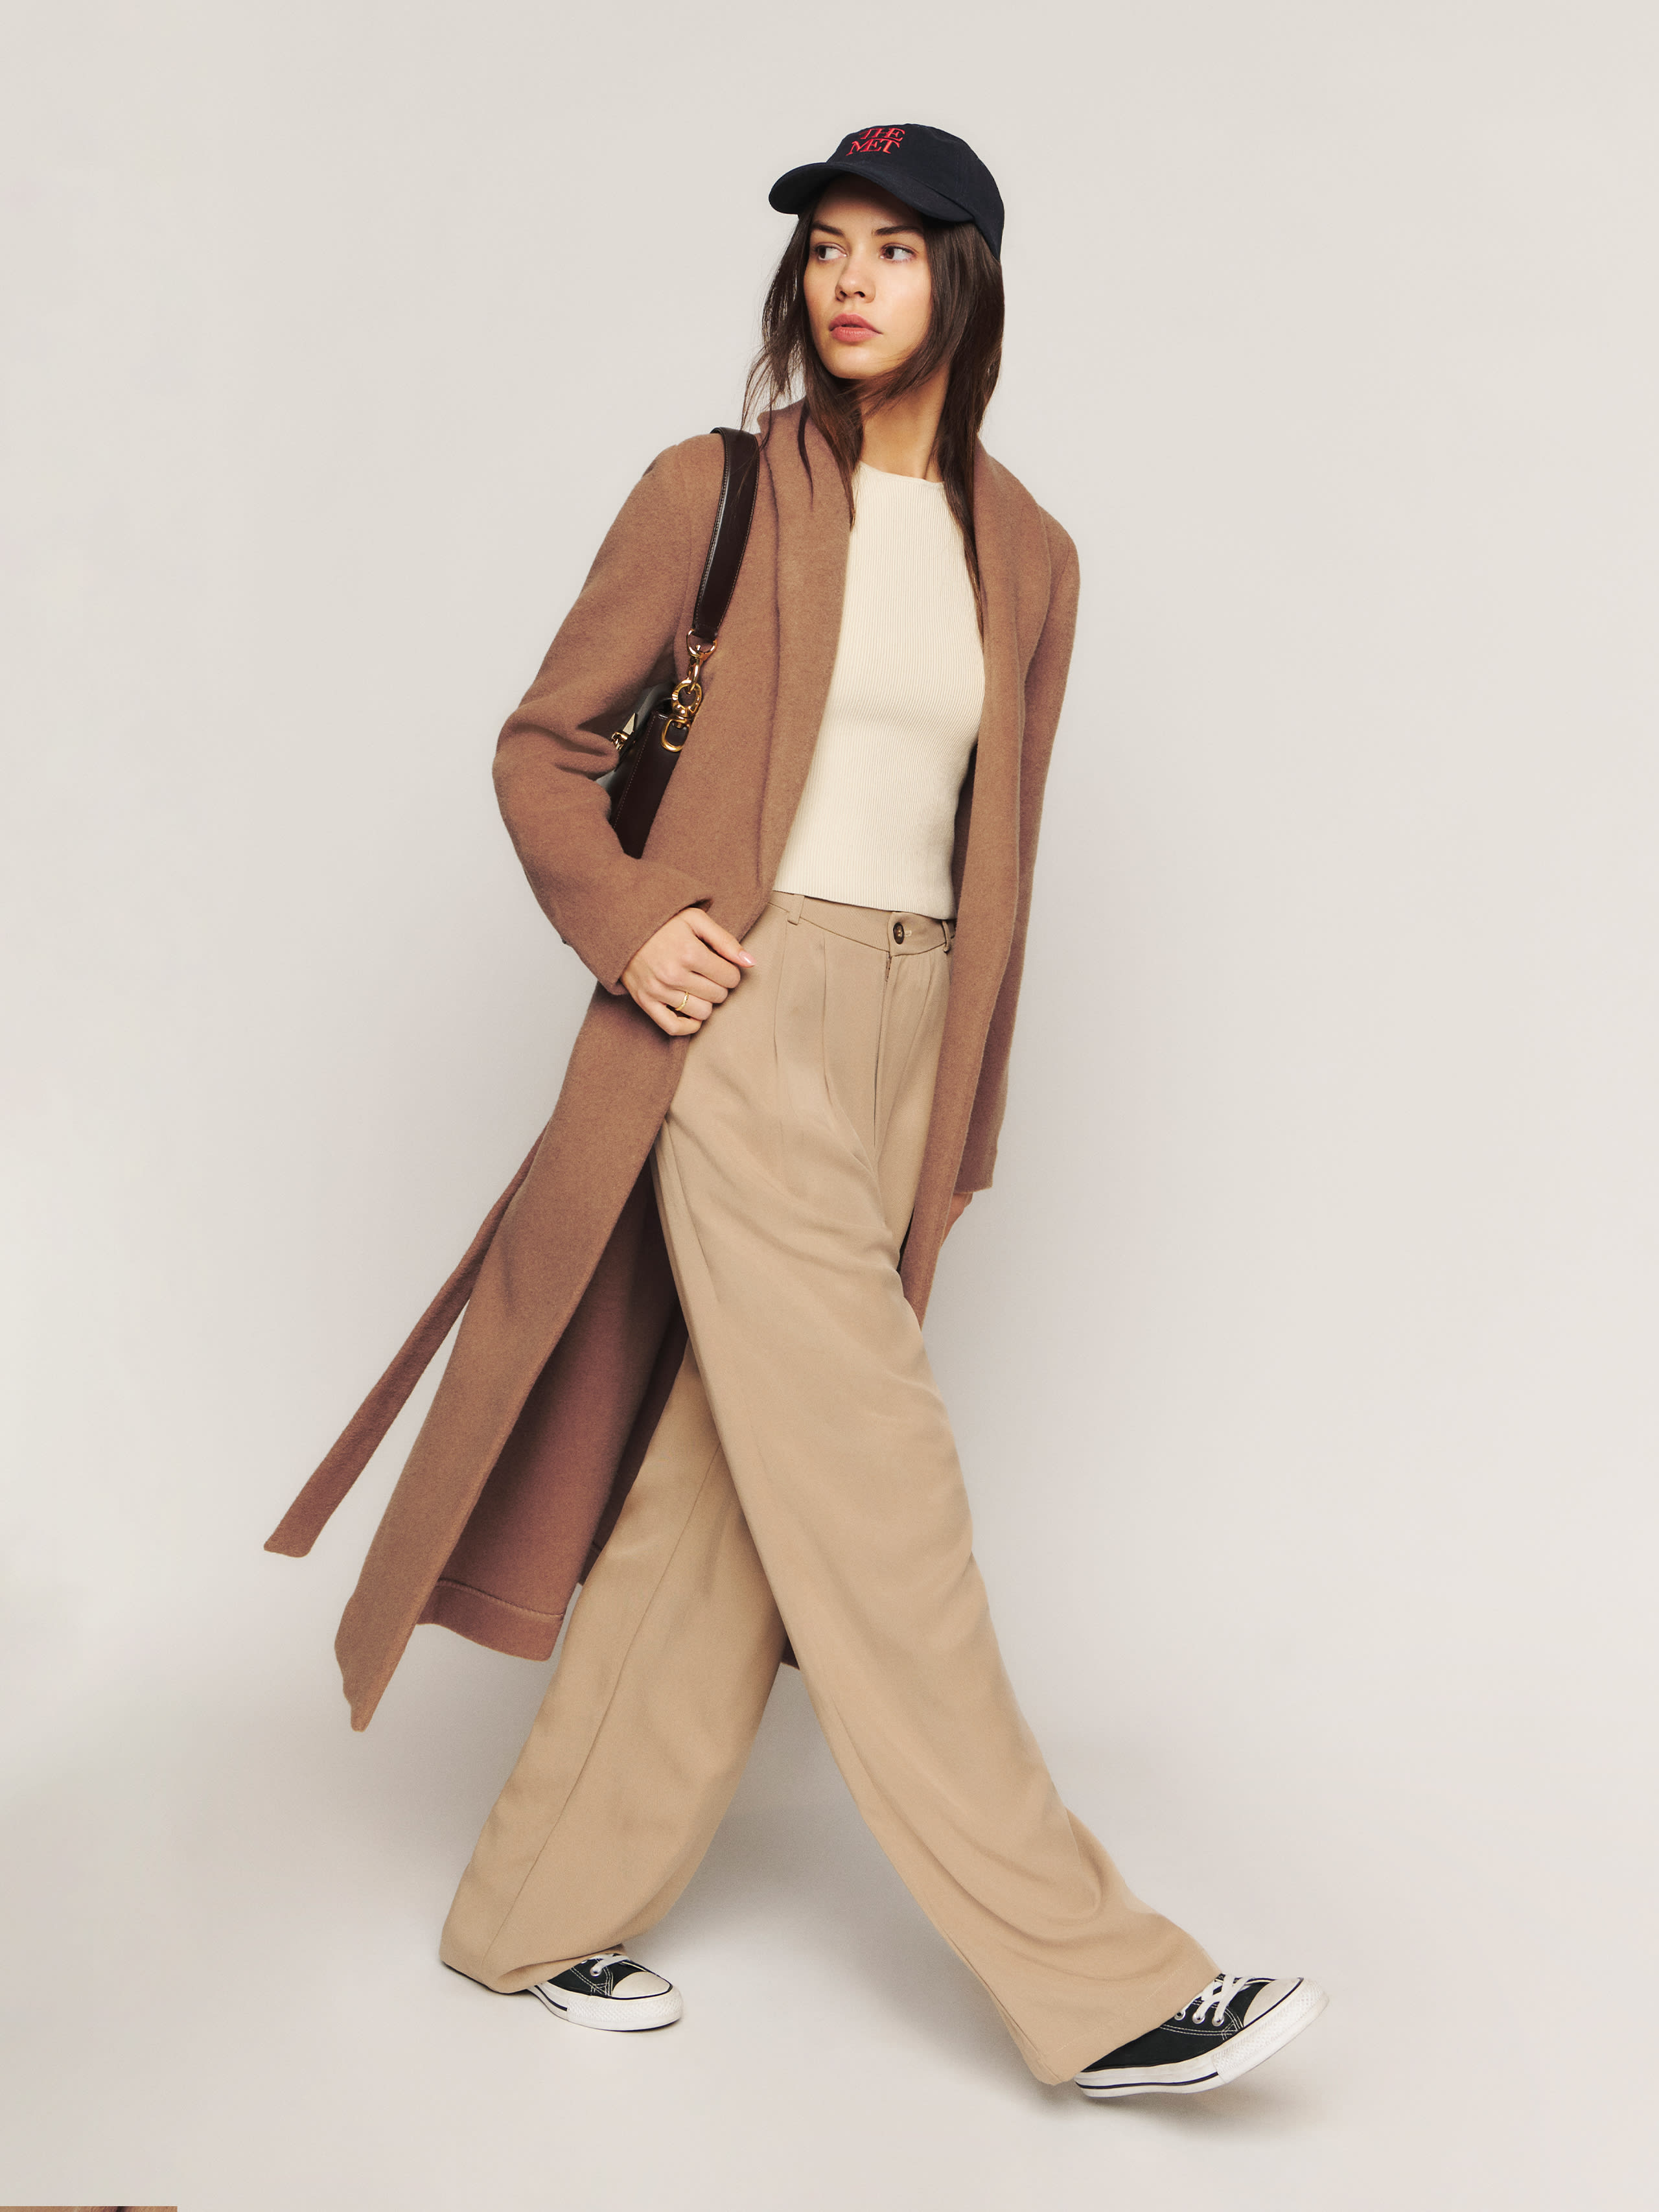 Reformation Downing Coat In Caramel